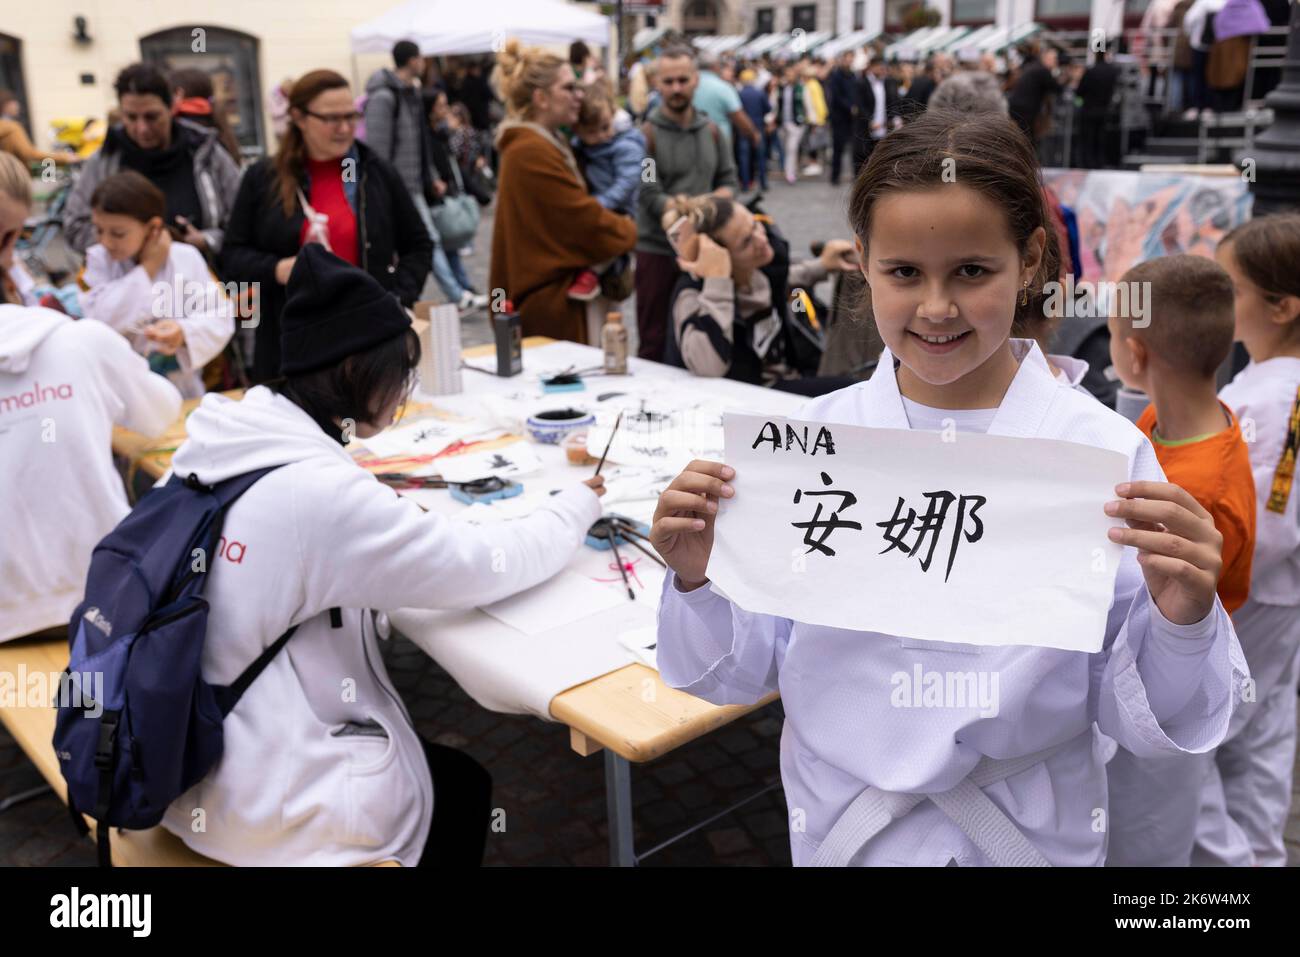 Ljubljana, Slovenia. 15th Oct, 2022. A girl shows her name in Chinese calligraphy at a charity event in Ljubljana, Slovenia, Oct. 15, 2022. The Confucius Institute in Ljubljana on Saturday showcased Chinese culture at a charity event held in the capital of Slovenia. Visitors had the chance to taste Chinese tea, experience Chinese calligraphy, and put on Hanfu, traditional Chinese clothing, to take photos at the event, which aims at raising fund for Slovenian children in need. Credit: Zeljko Stevanic/Xinhua/Alamy Live News Stock Photo